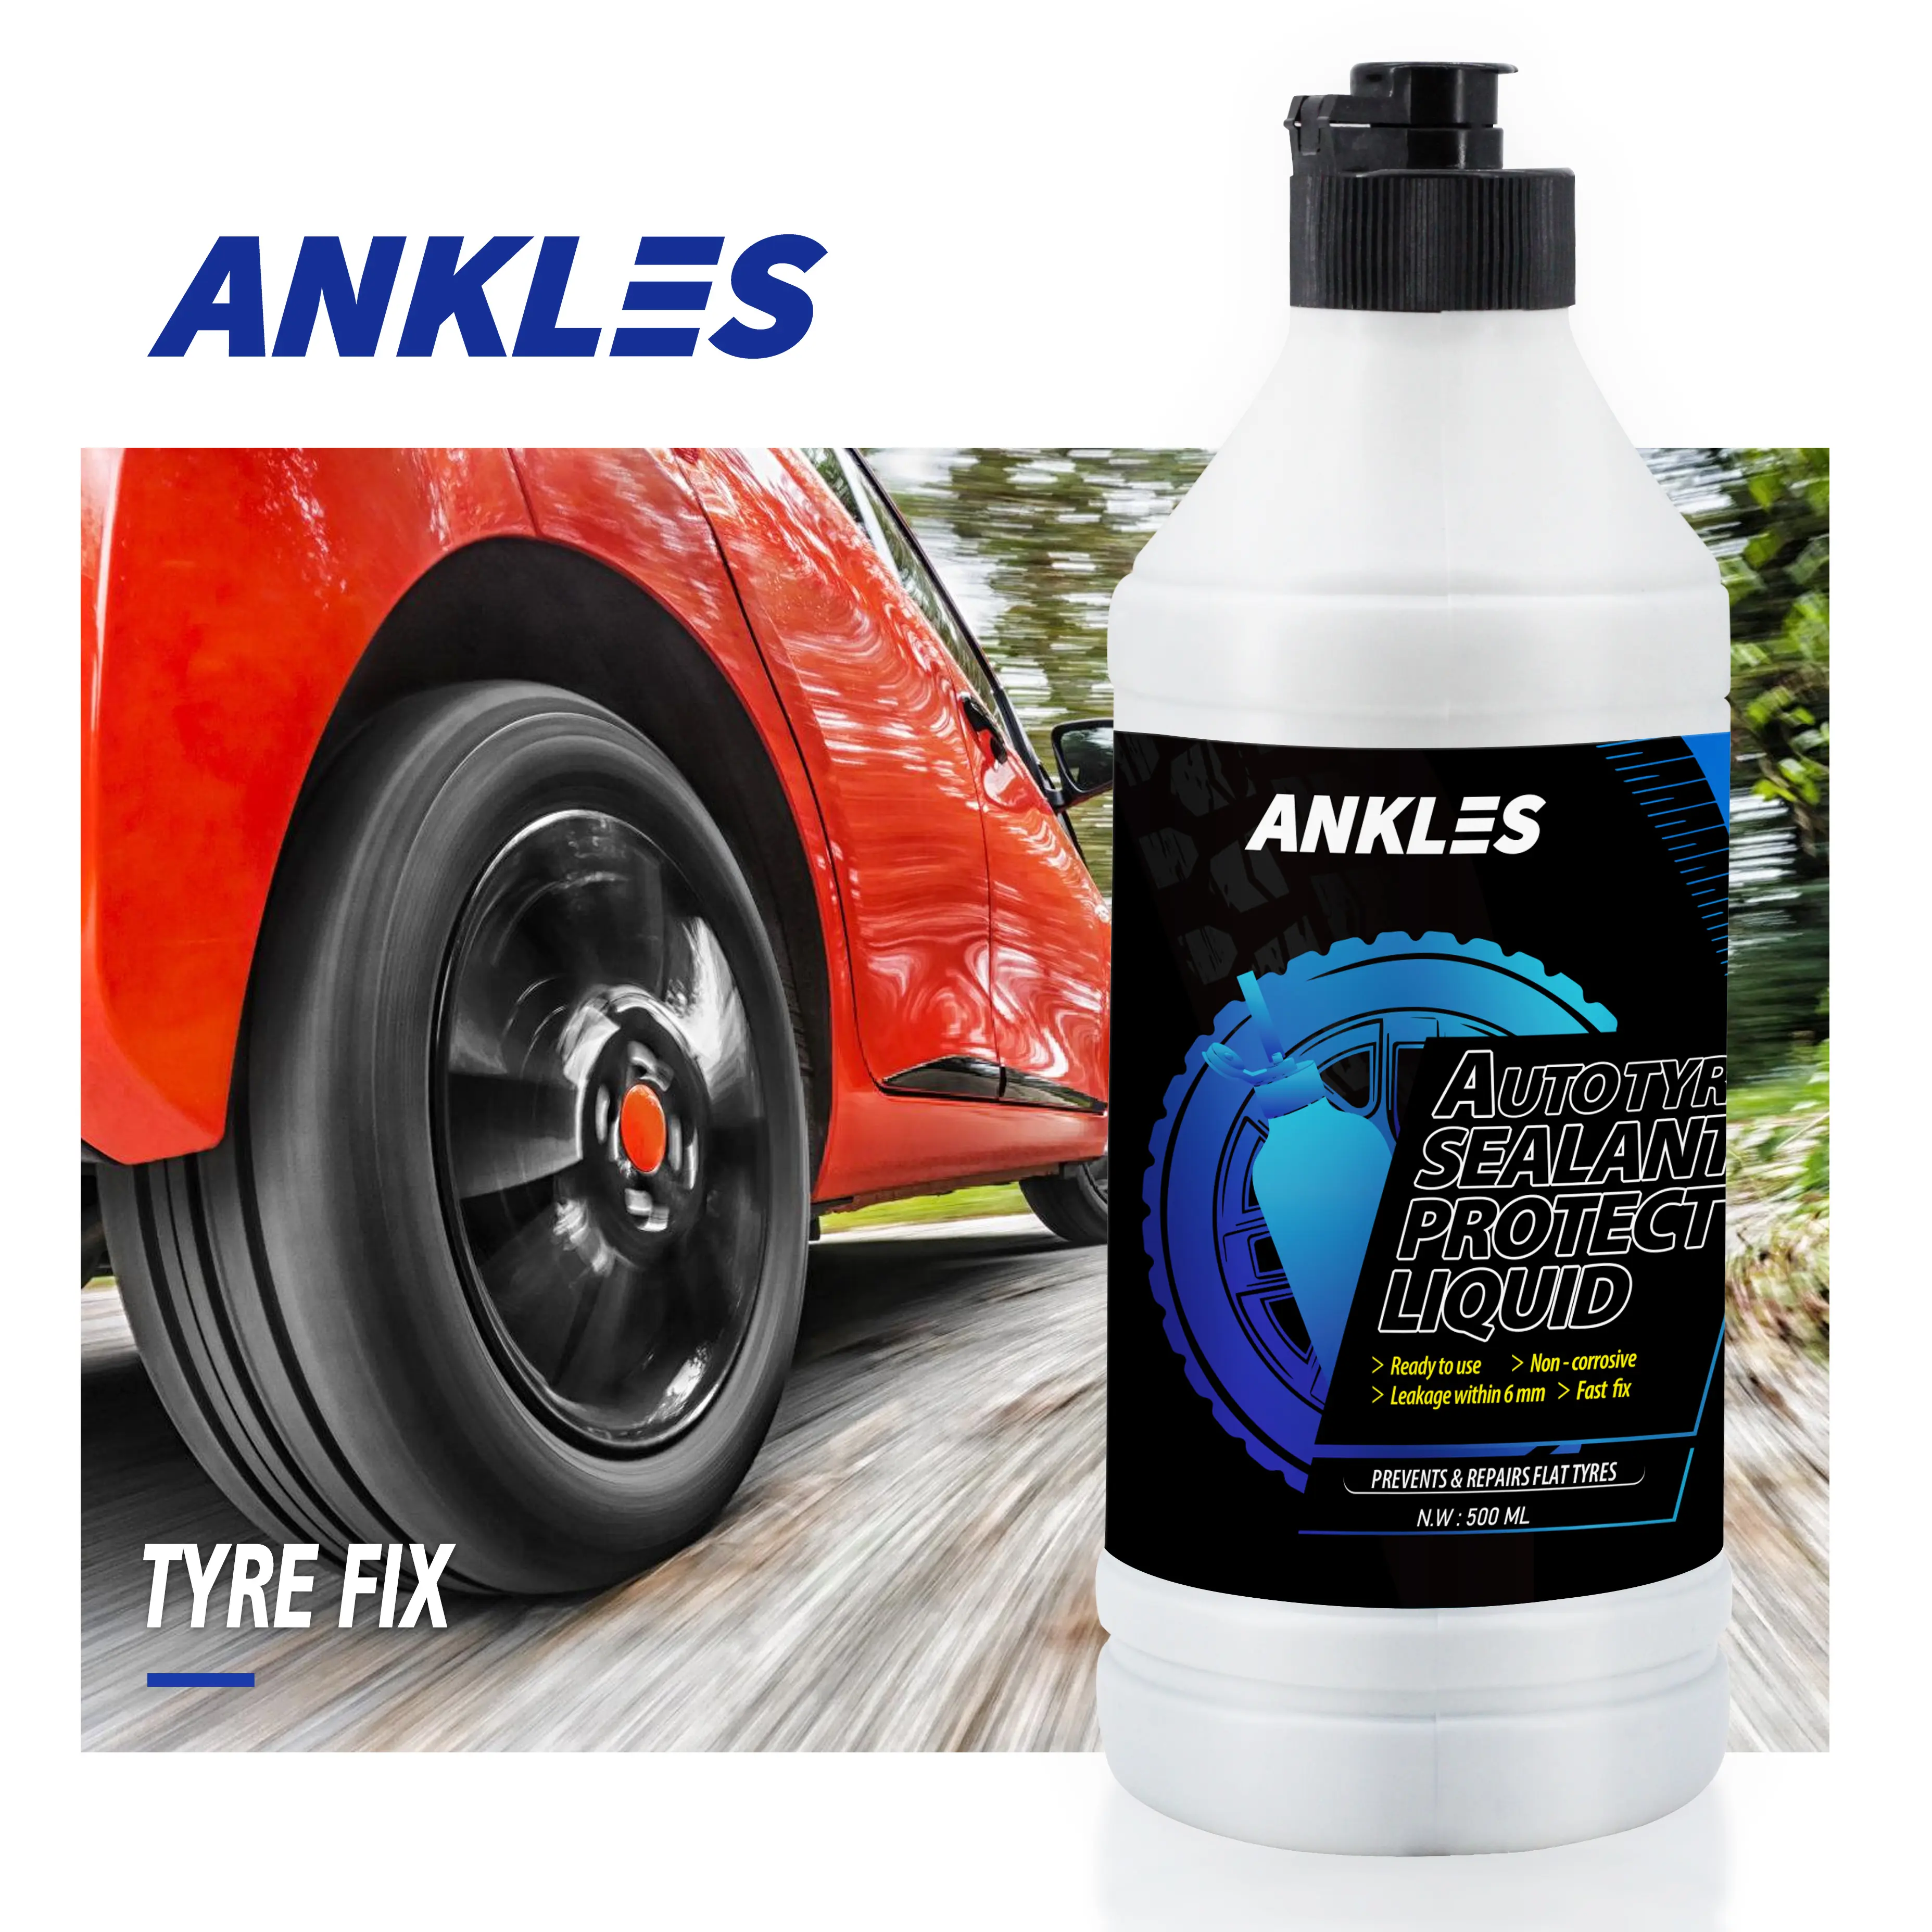 ANKLES TDS awarded hand tools of tire puncture repair kit including air compressor and magic tire sealant liquid